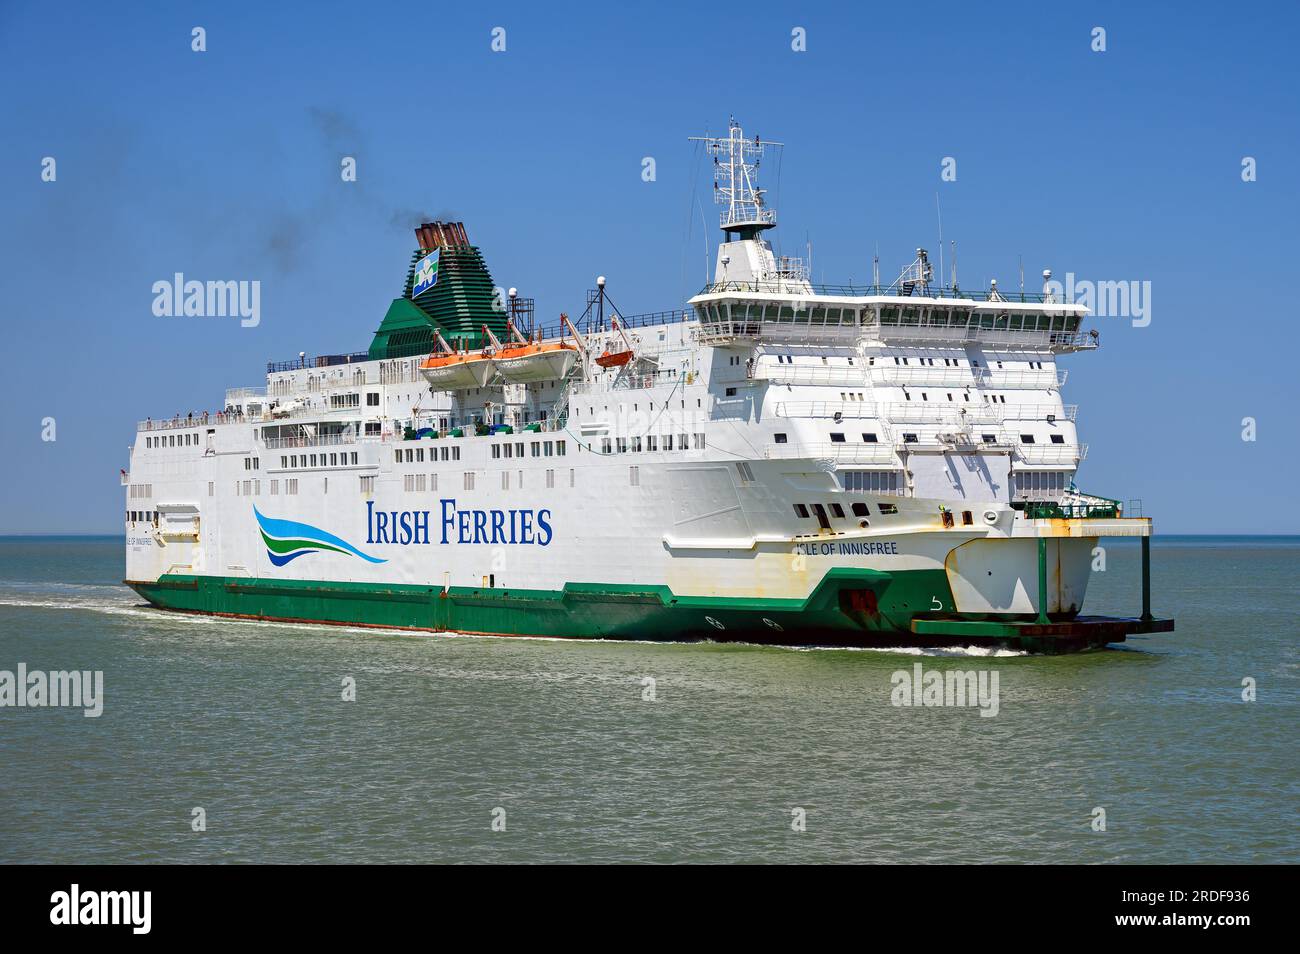 Isle of Innisfree is a cross-Channel ferry operated by Irish Ferries between Dover and Calais. Stock Photo